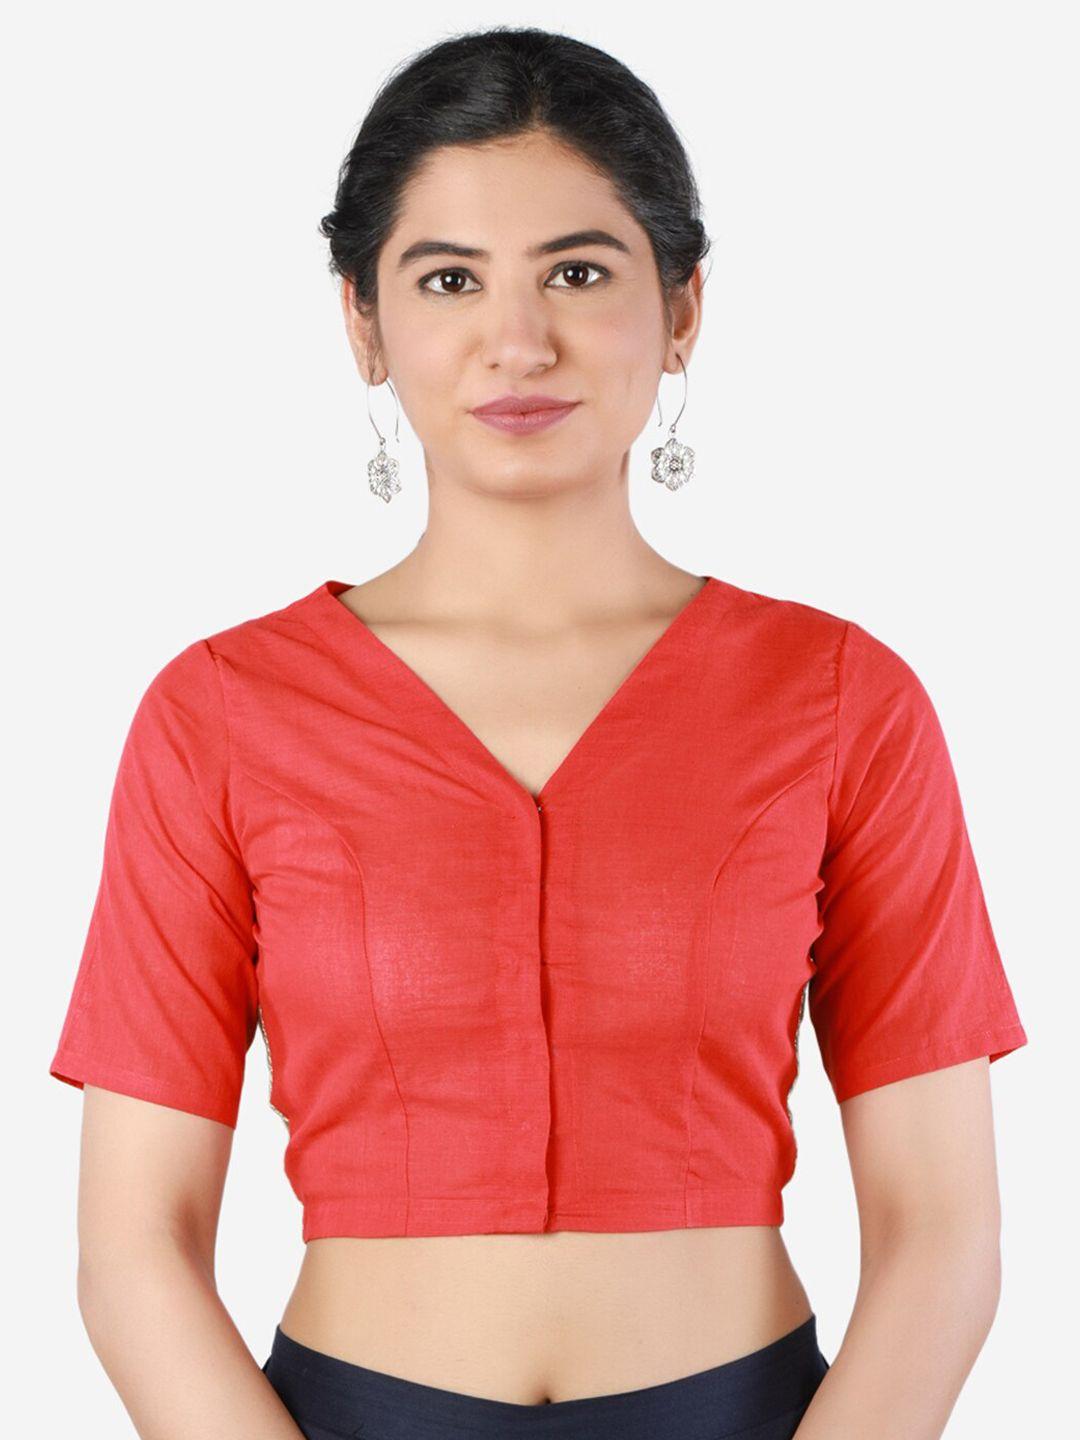 llajja red solid pure cotton saree blouse